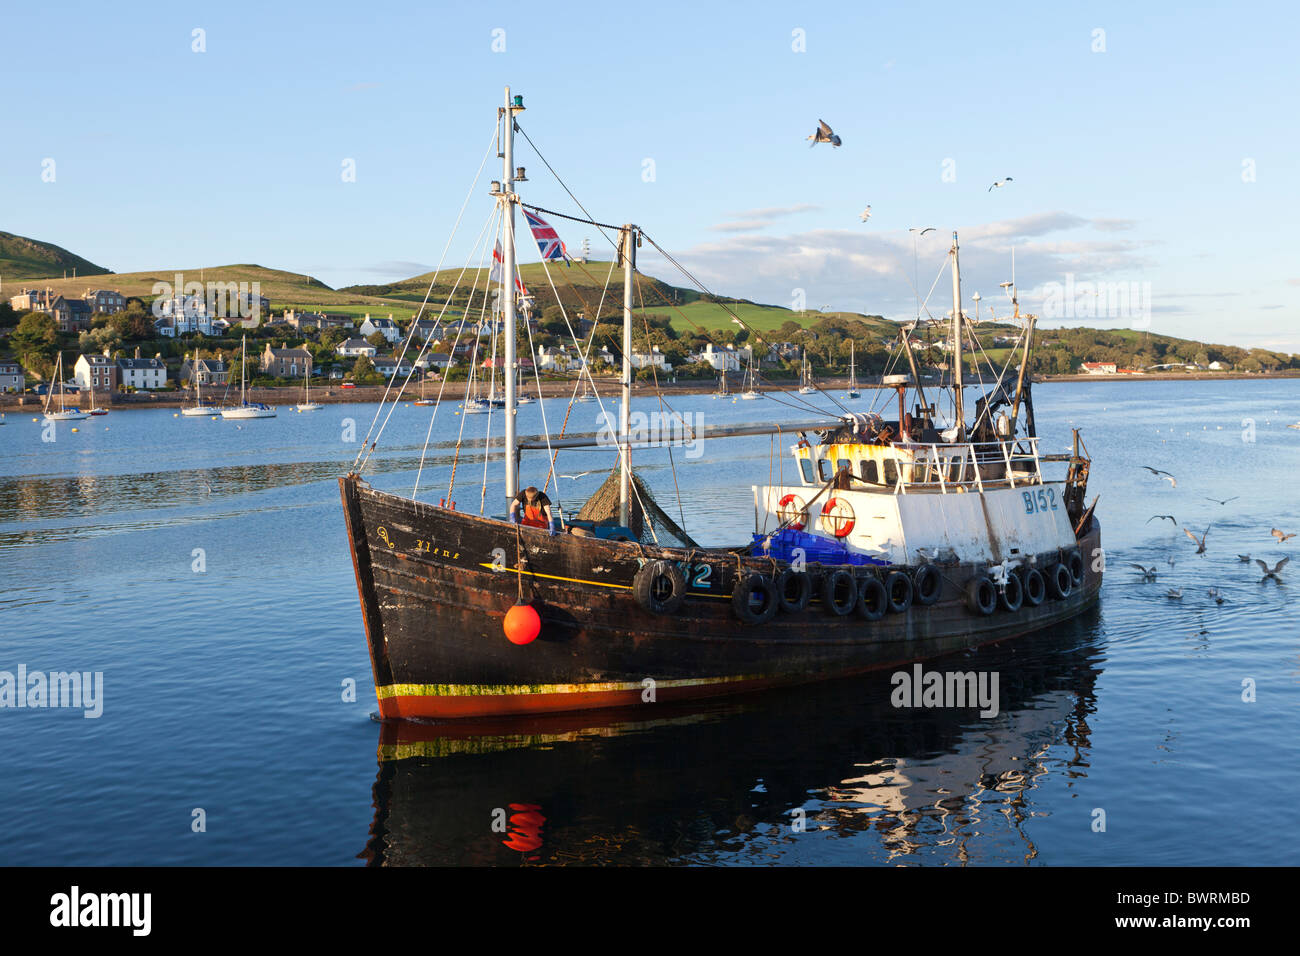 A fishing boat entering the harbour in Campbeltown Loch, Campbeltown on the Kintyre peninsula, Argyll & Bute, Scotland Stock Photo